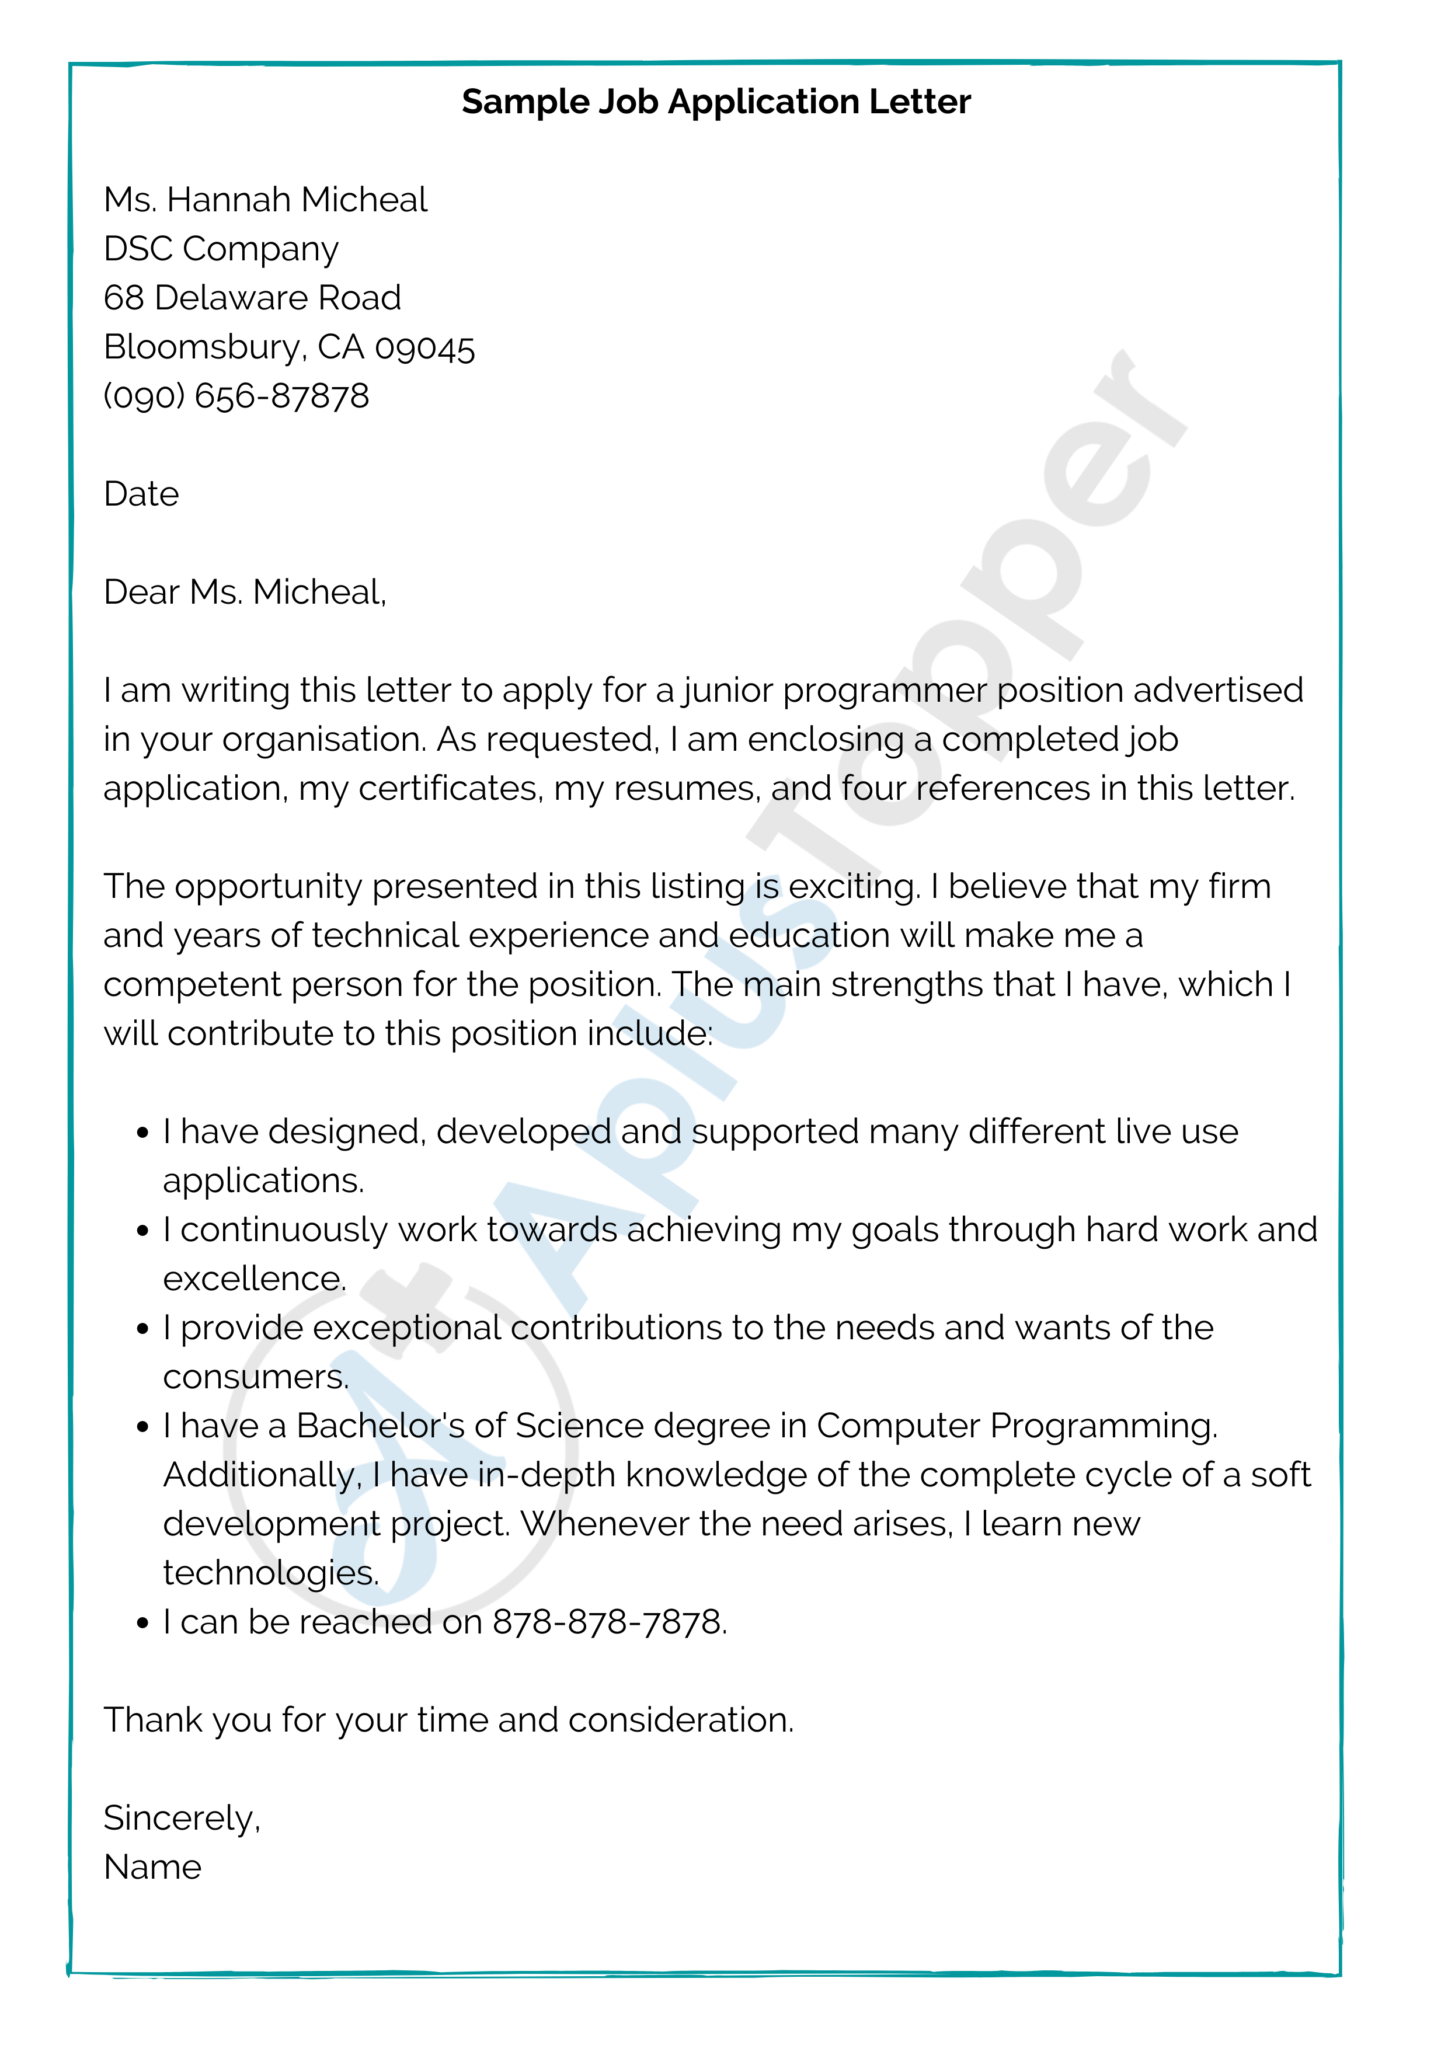 resume and job application letter format